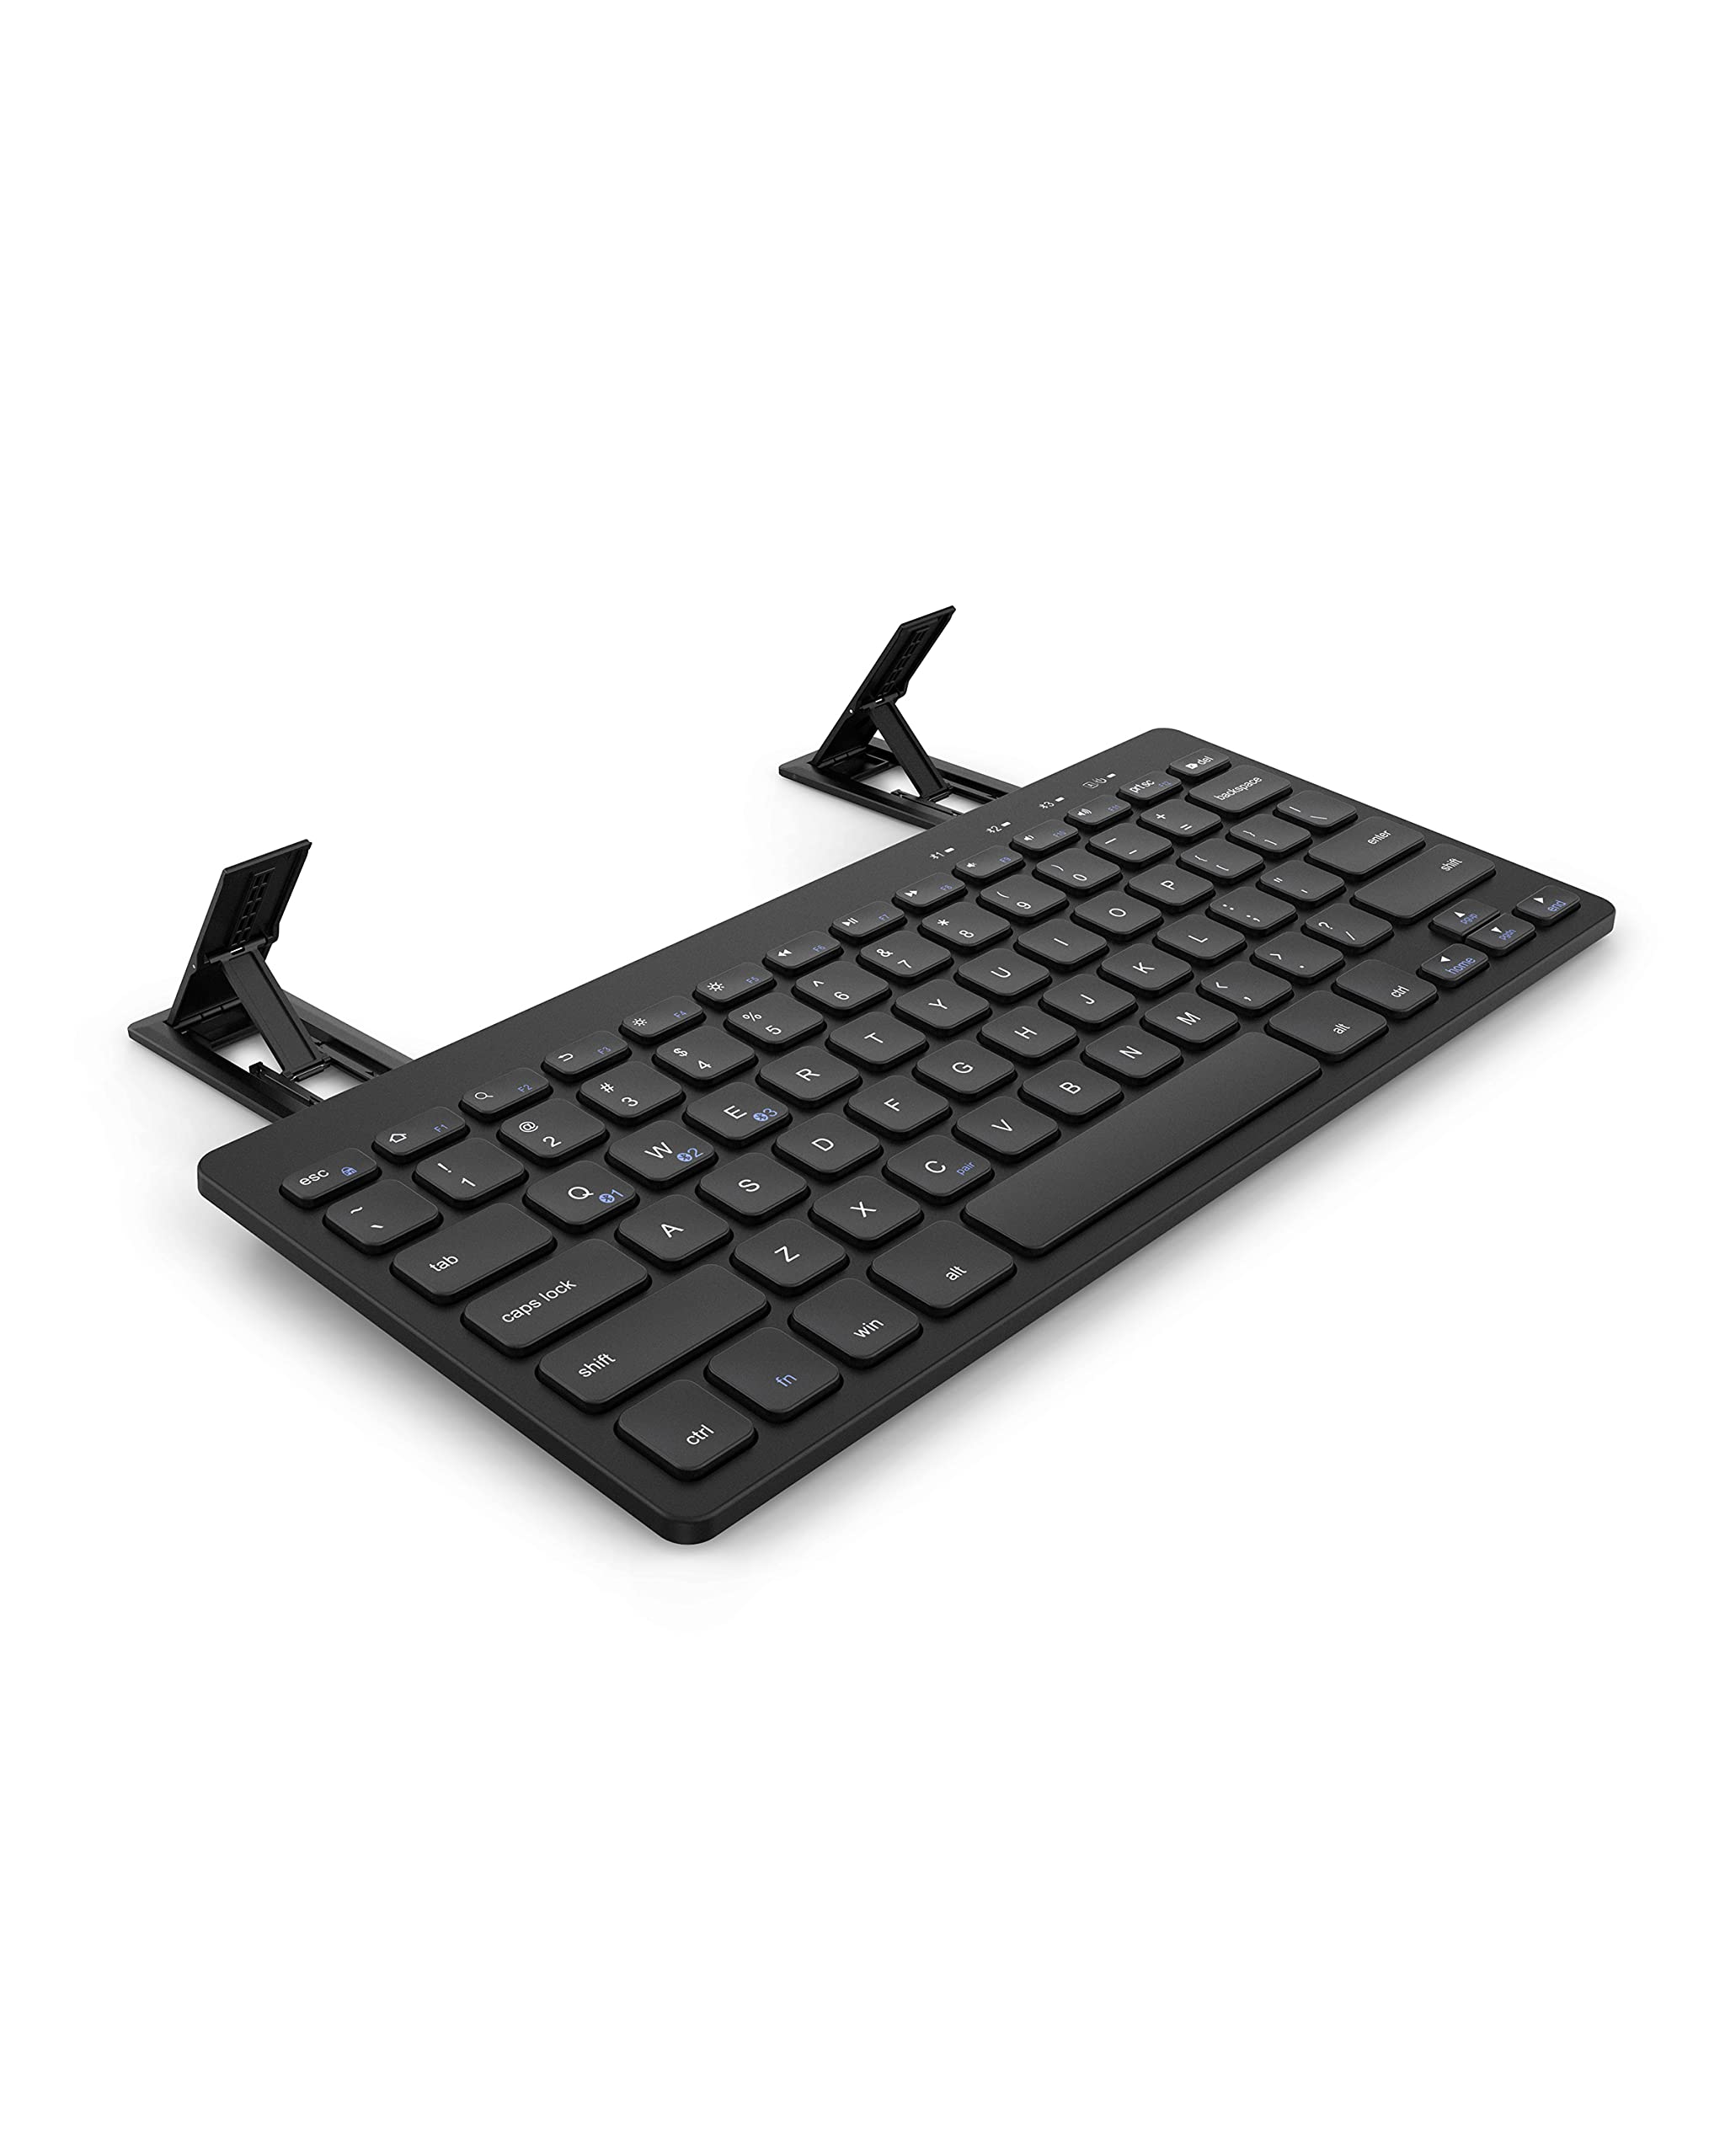 Anker Compact Wireless Keyboard for Tablets and Smartphones (Black) $9.69 + Free Shipping w/ Prime or on $35+ orders